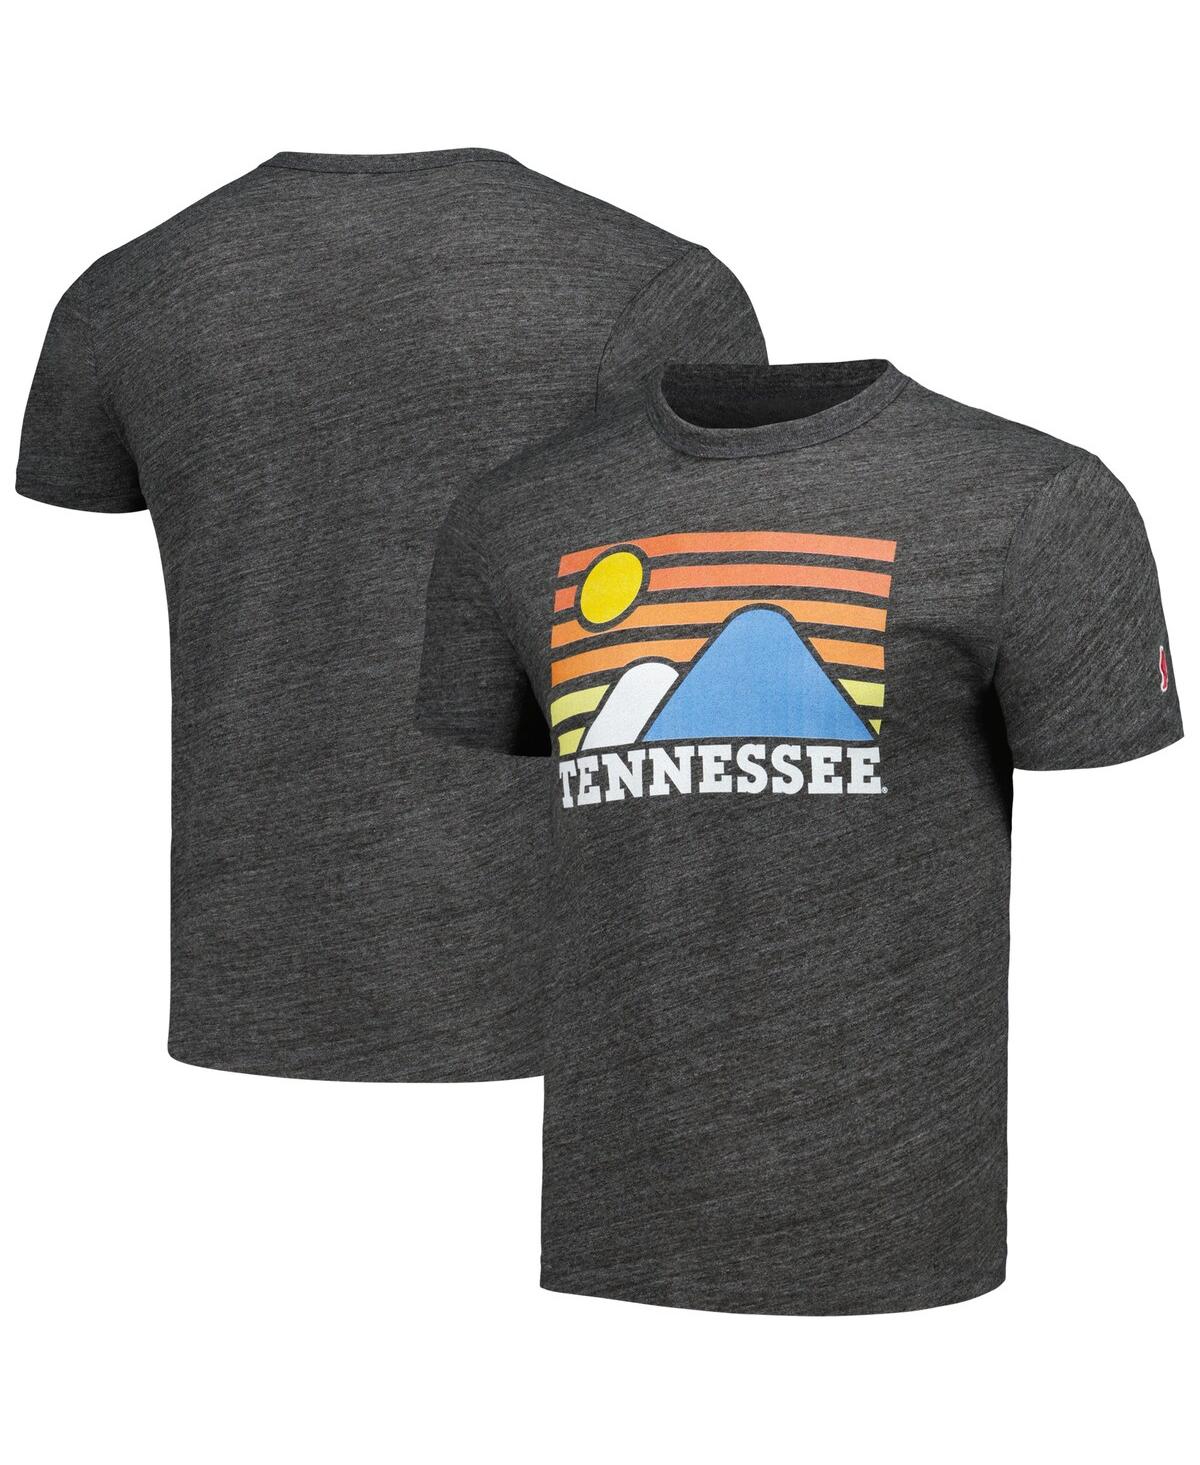 Men's League Collegiate Wear Heather Charcoal Distressed Tennessee Volunteers Hyper Local Victory Falls Tri-Blend T-shirt - Heather Charcoal